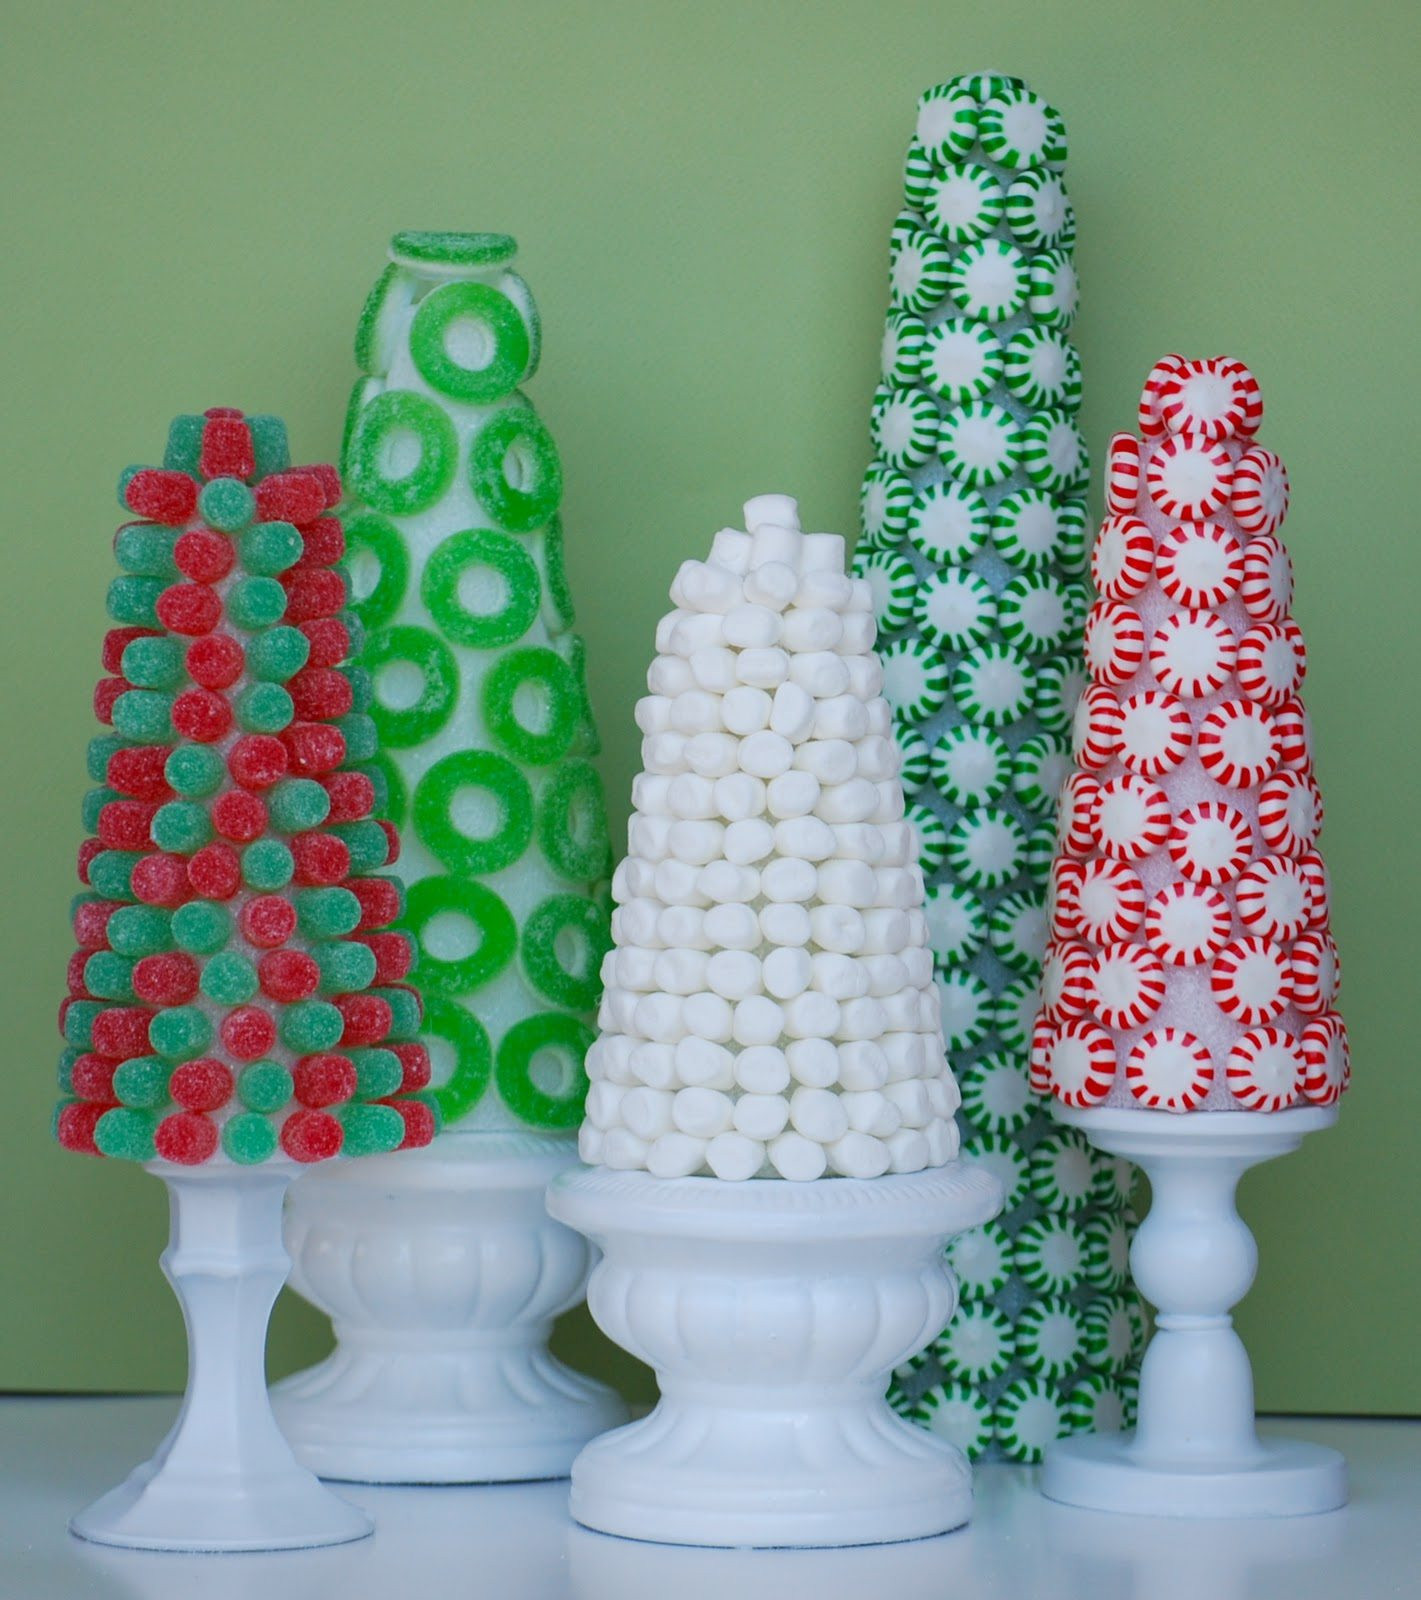 Candy Christmas Tree Craft
 The Sweetest Christmas Craft Candy Trees